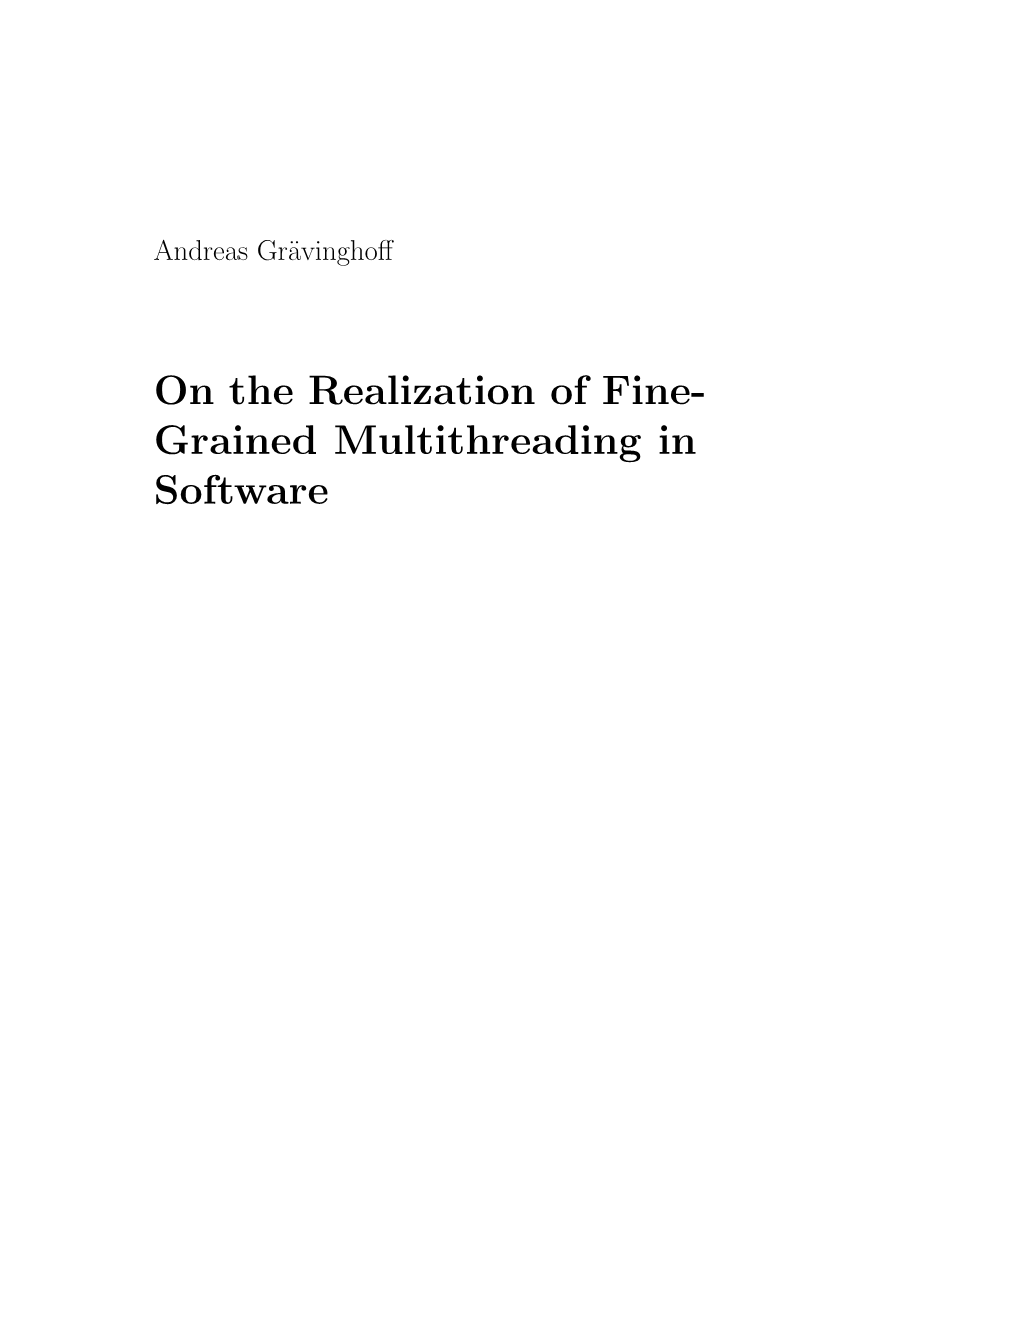 On the Realization of Fine-Grained Multithreading in Software